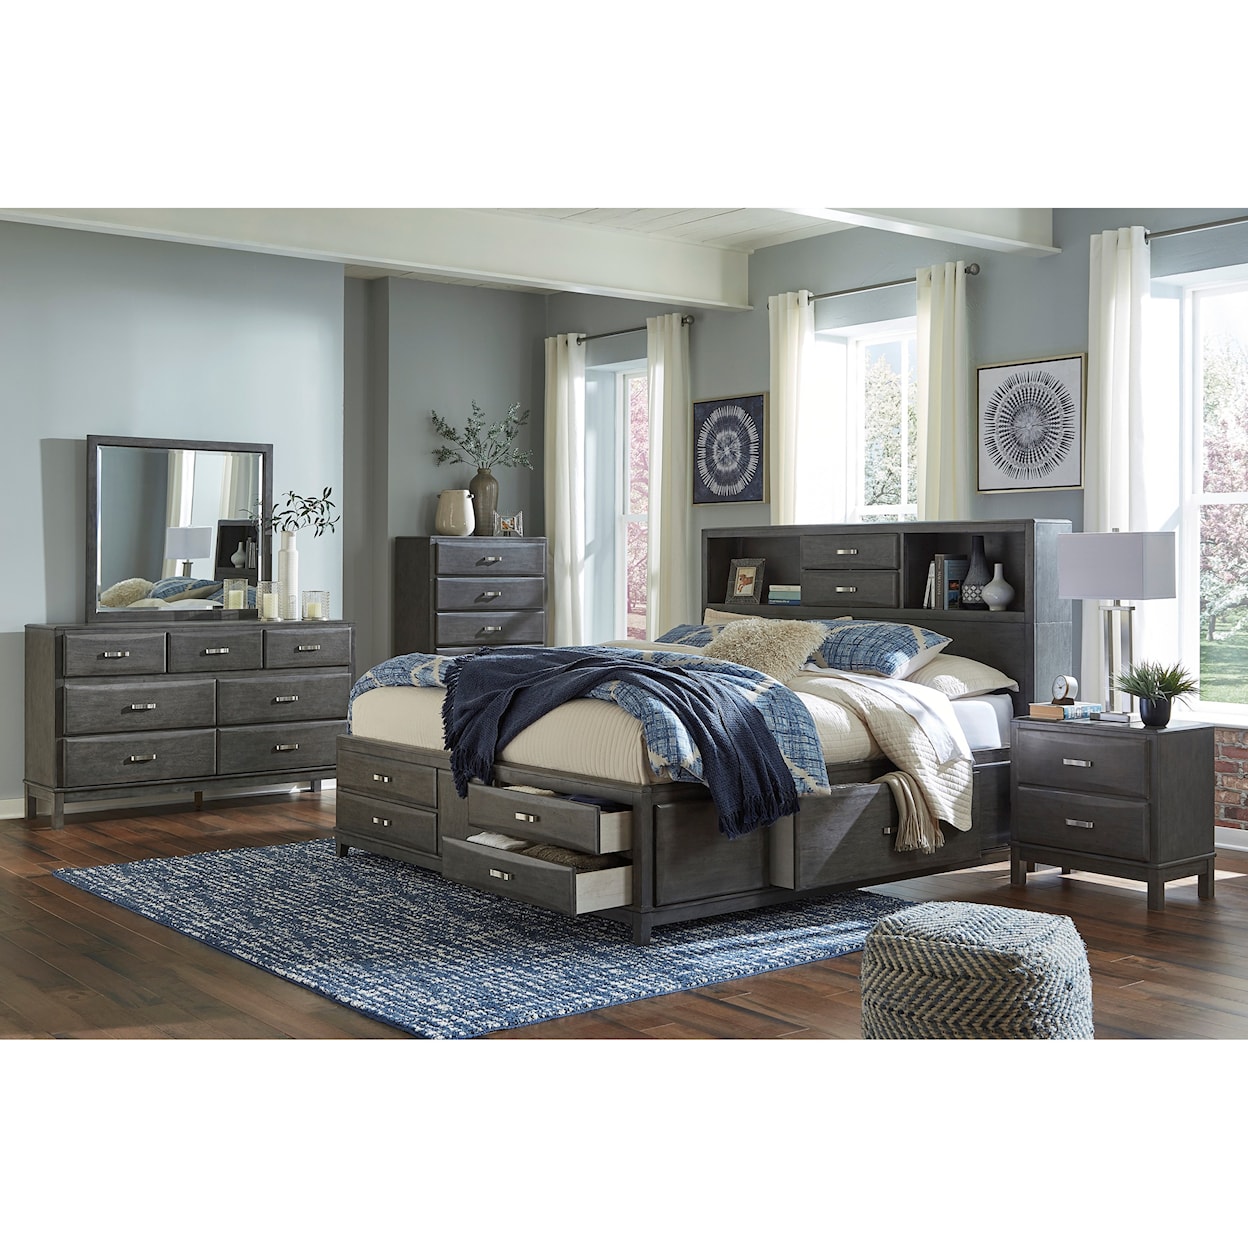 Signature Caitlyn Queen Storage Bed with 8 Drawers